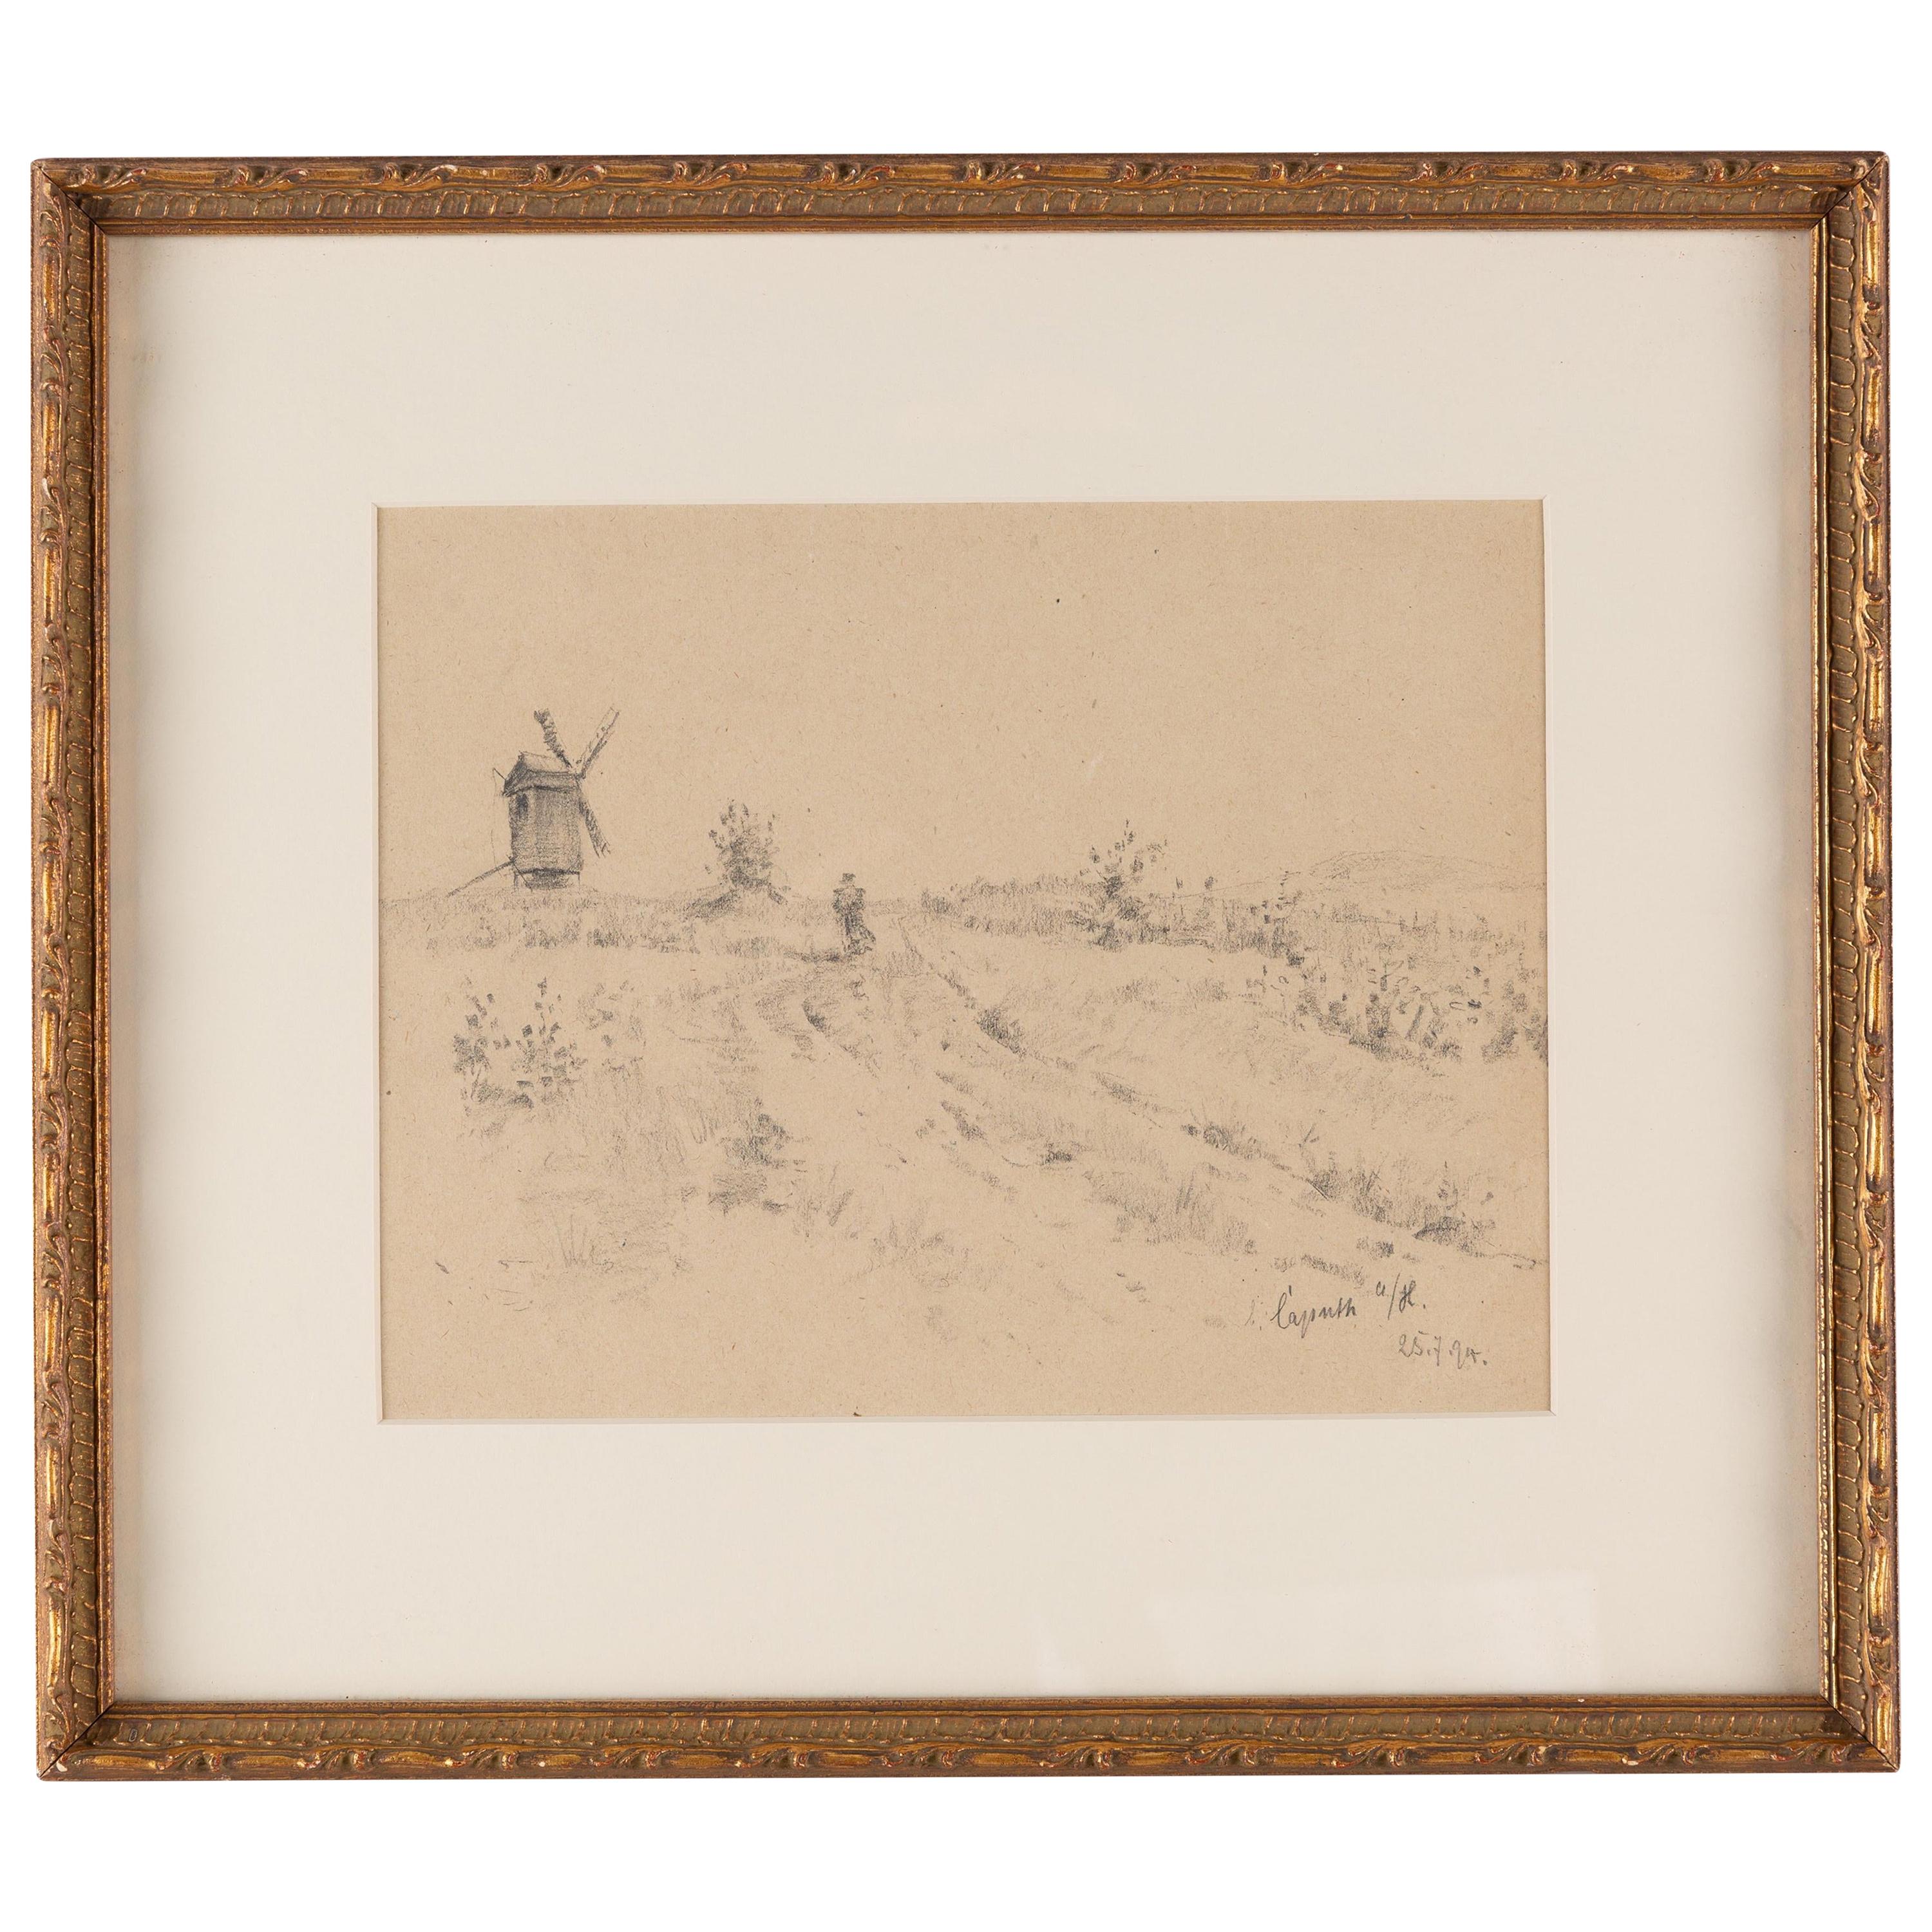 19th Century Pencil Drawing of a Figure on a Path with a Windmill Beyond